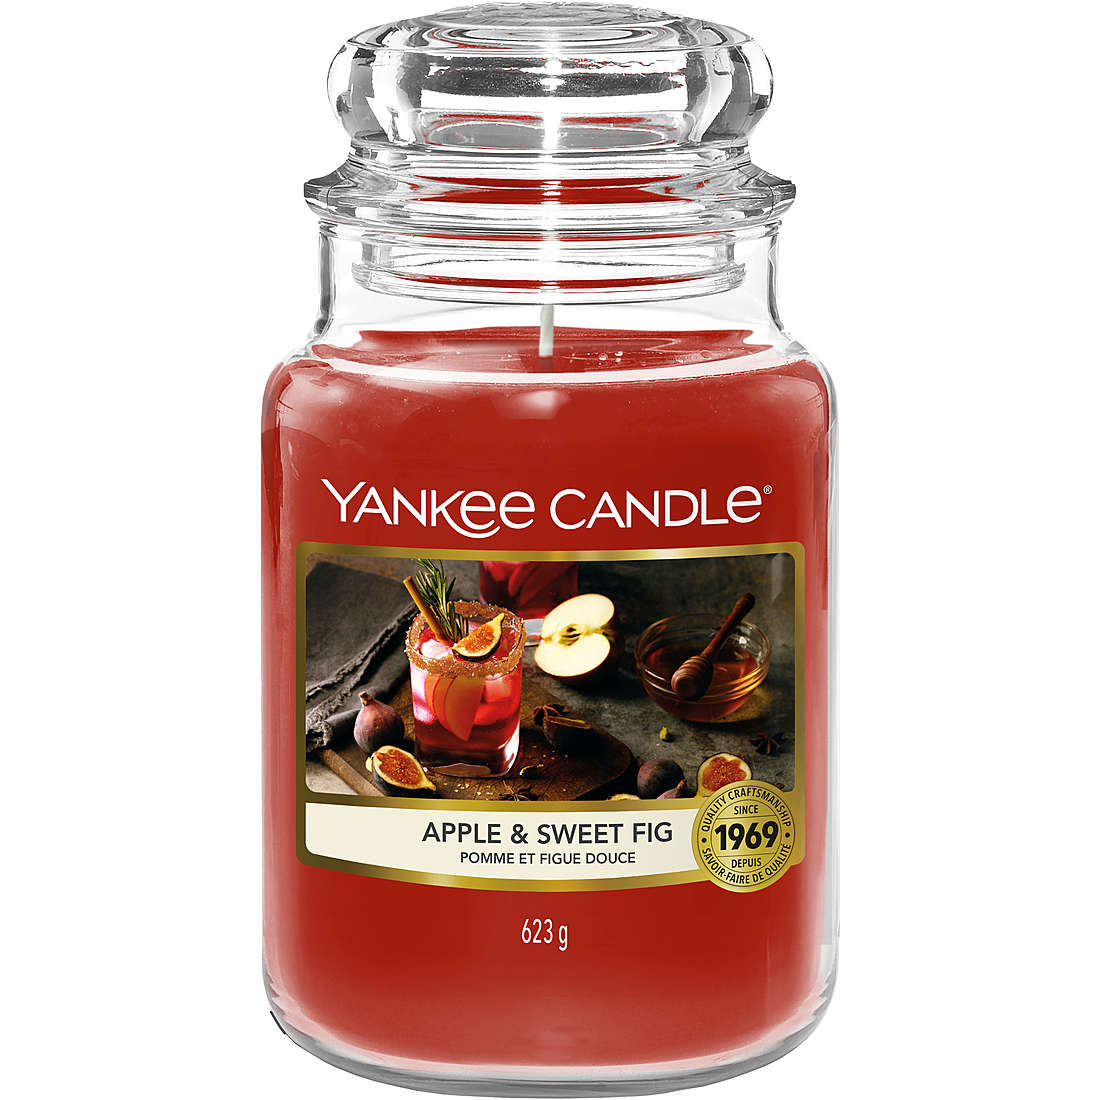 Candela Yankee Candle Giara, Grande Fall in Love with YC colore Rosso 1720945E